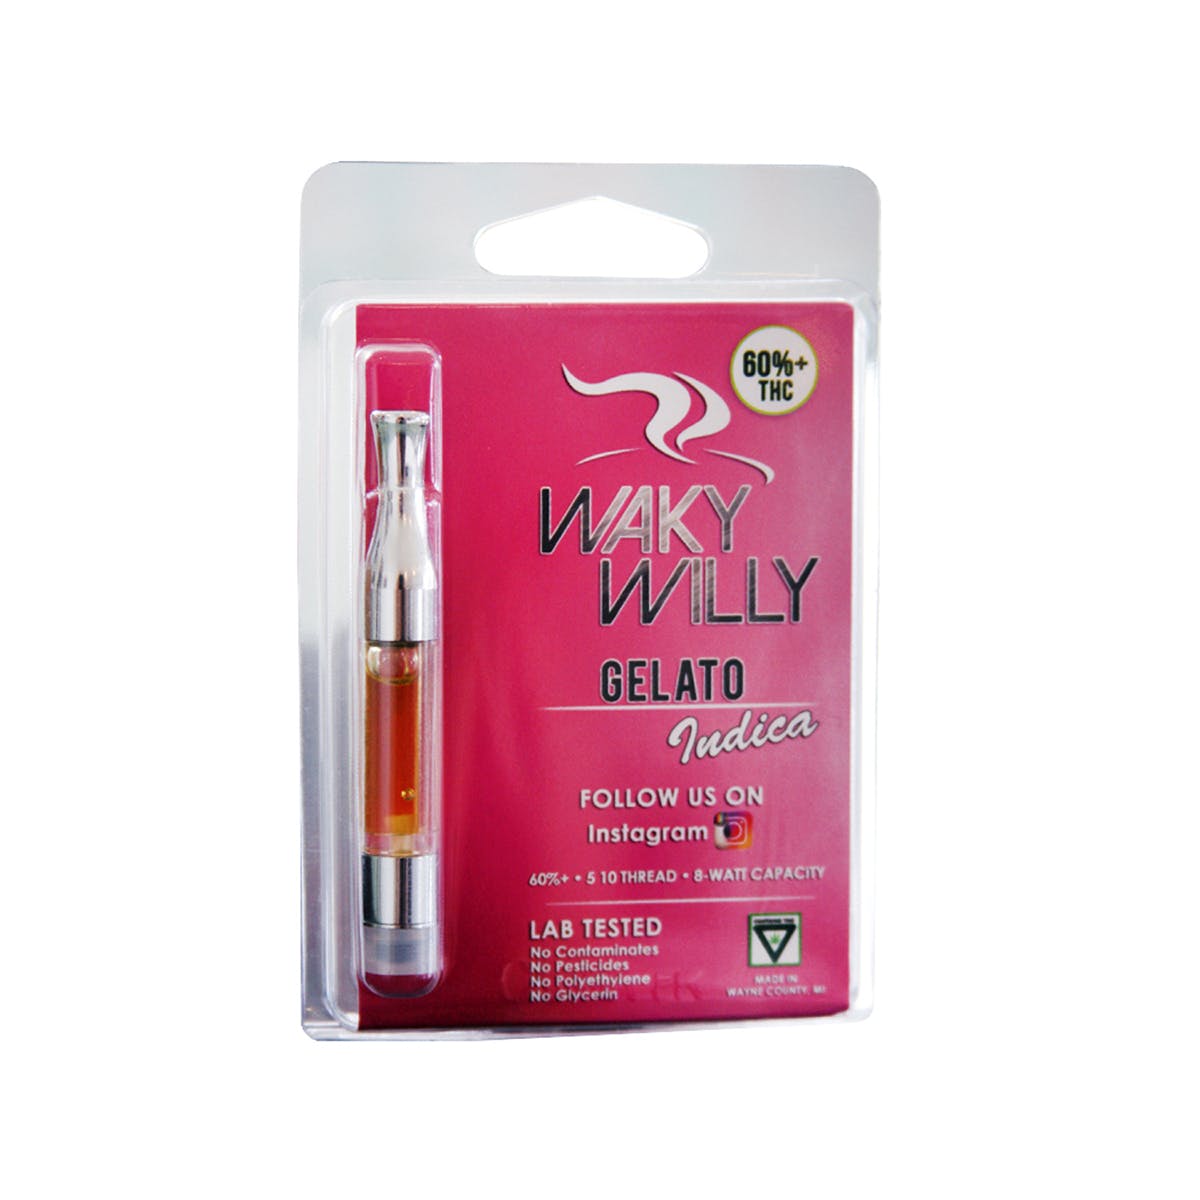 concentrate-gelato-waky-willy-cartridge